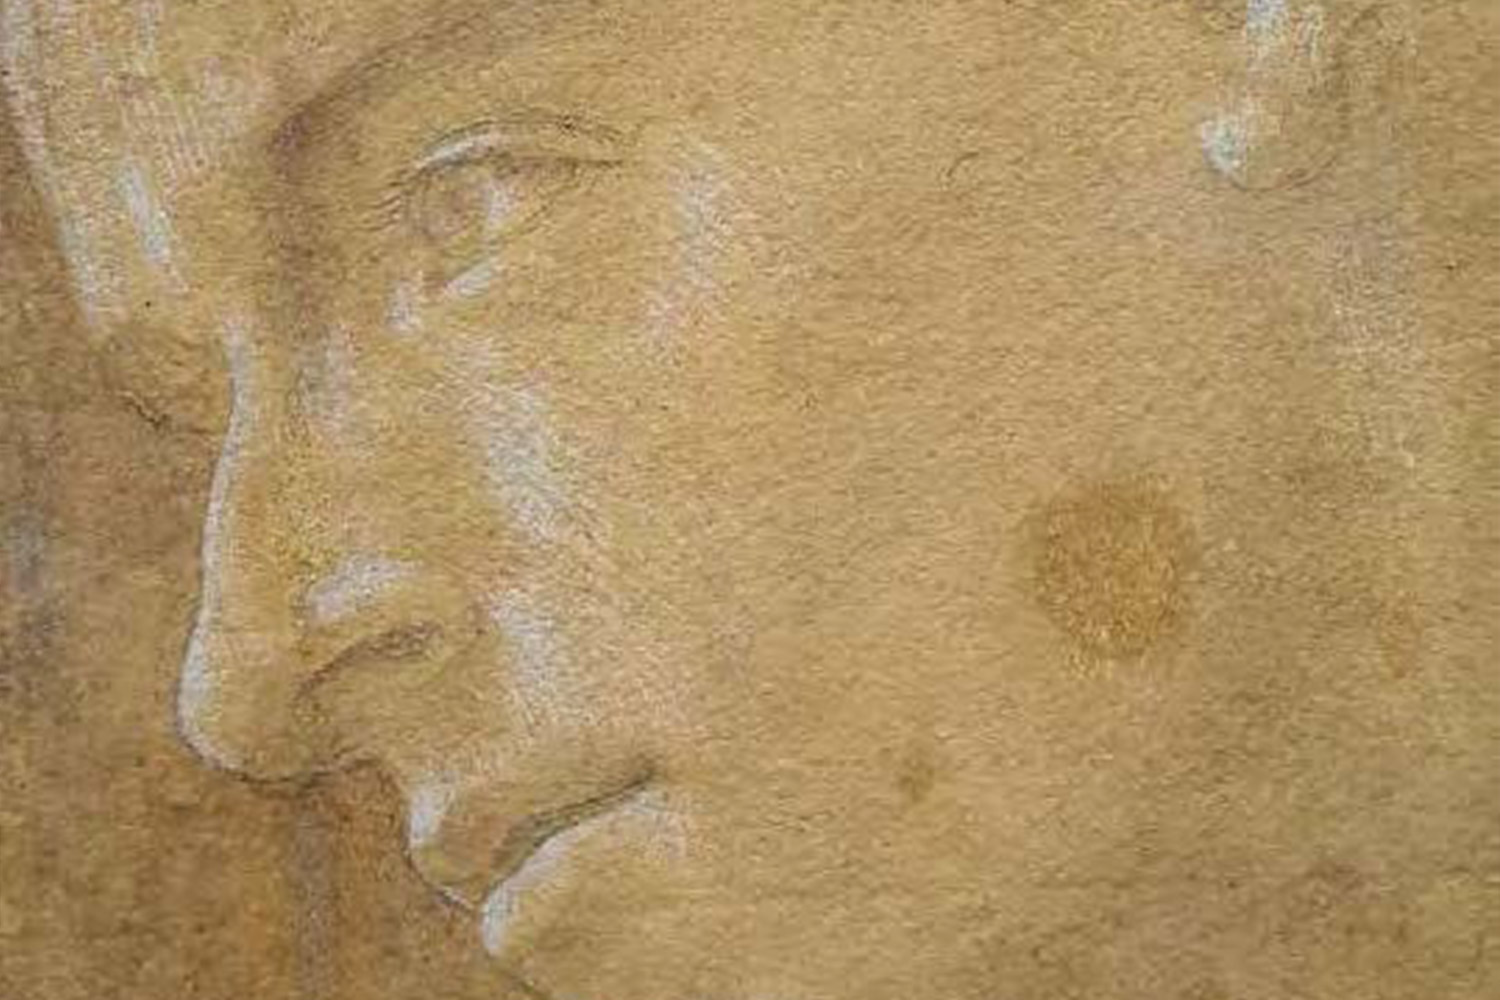 A close-up zoom of a Botticelli gold and beige drawing